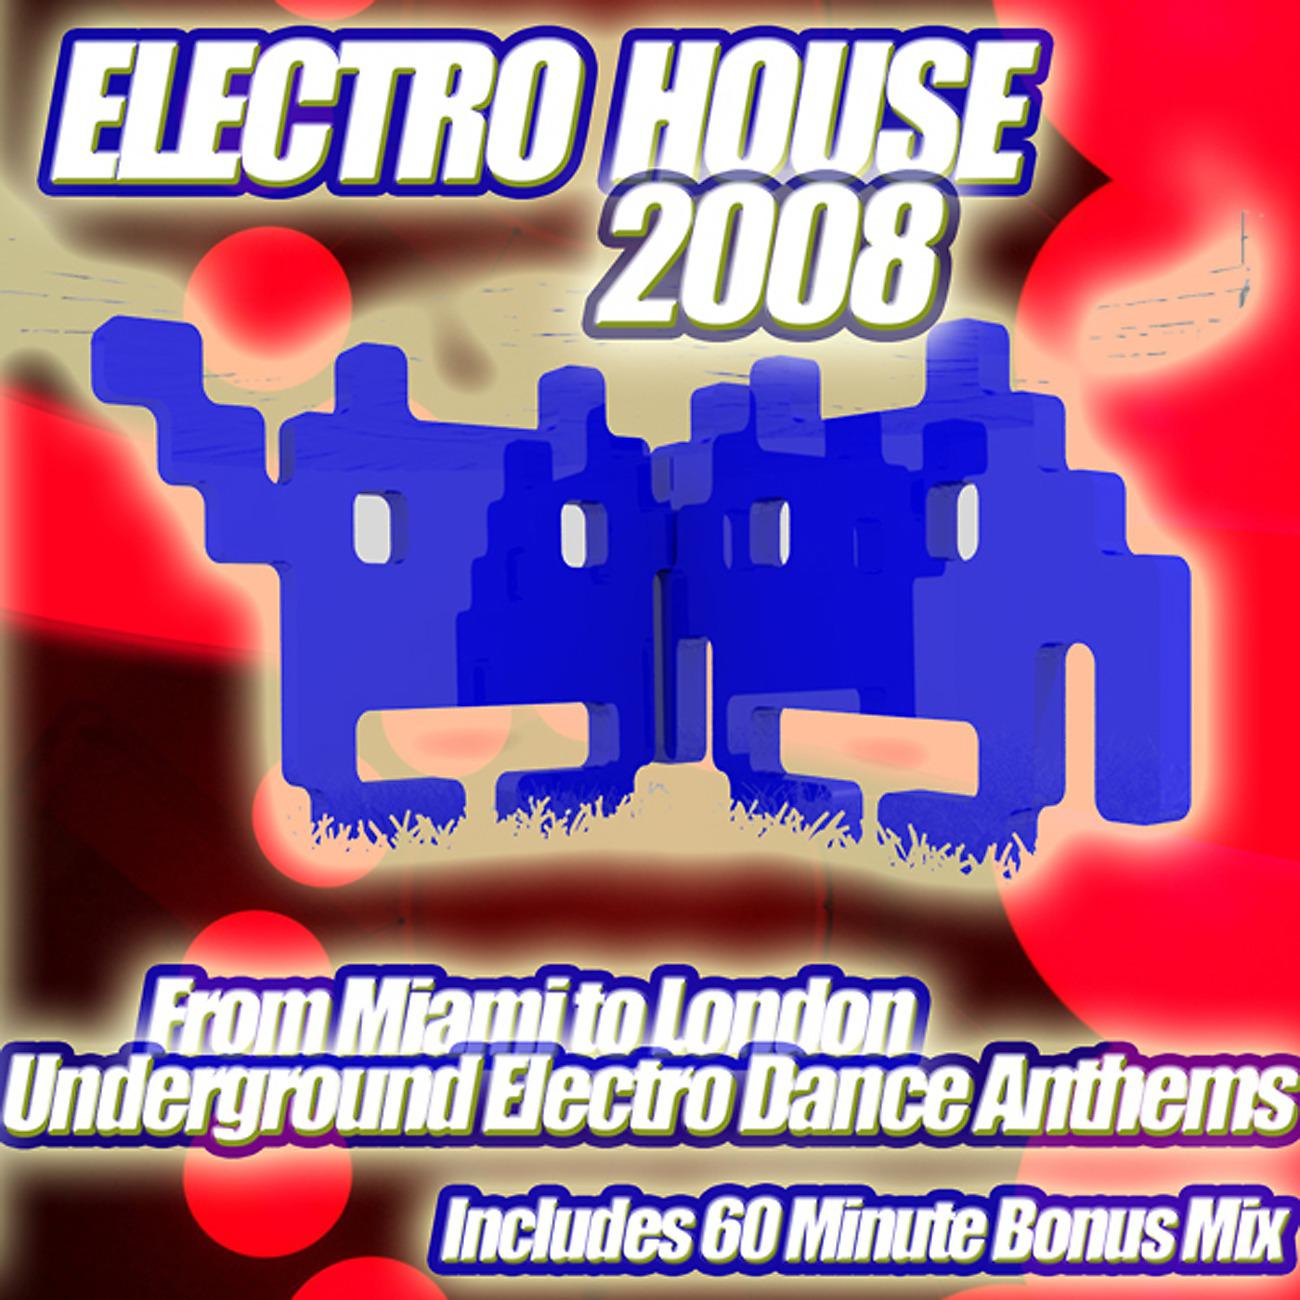 Постер альбома Electro House 2008 - From Miami to London, A Collection of Underground Electro Dance Anthems